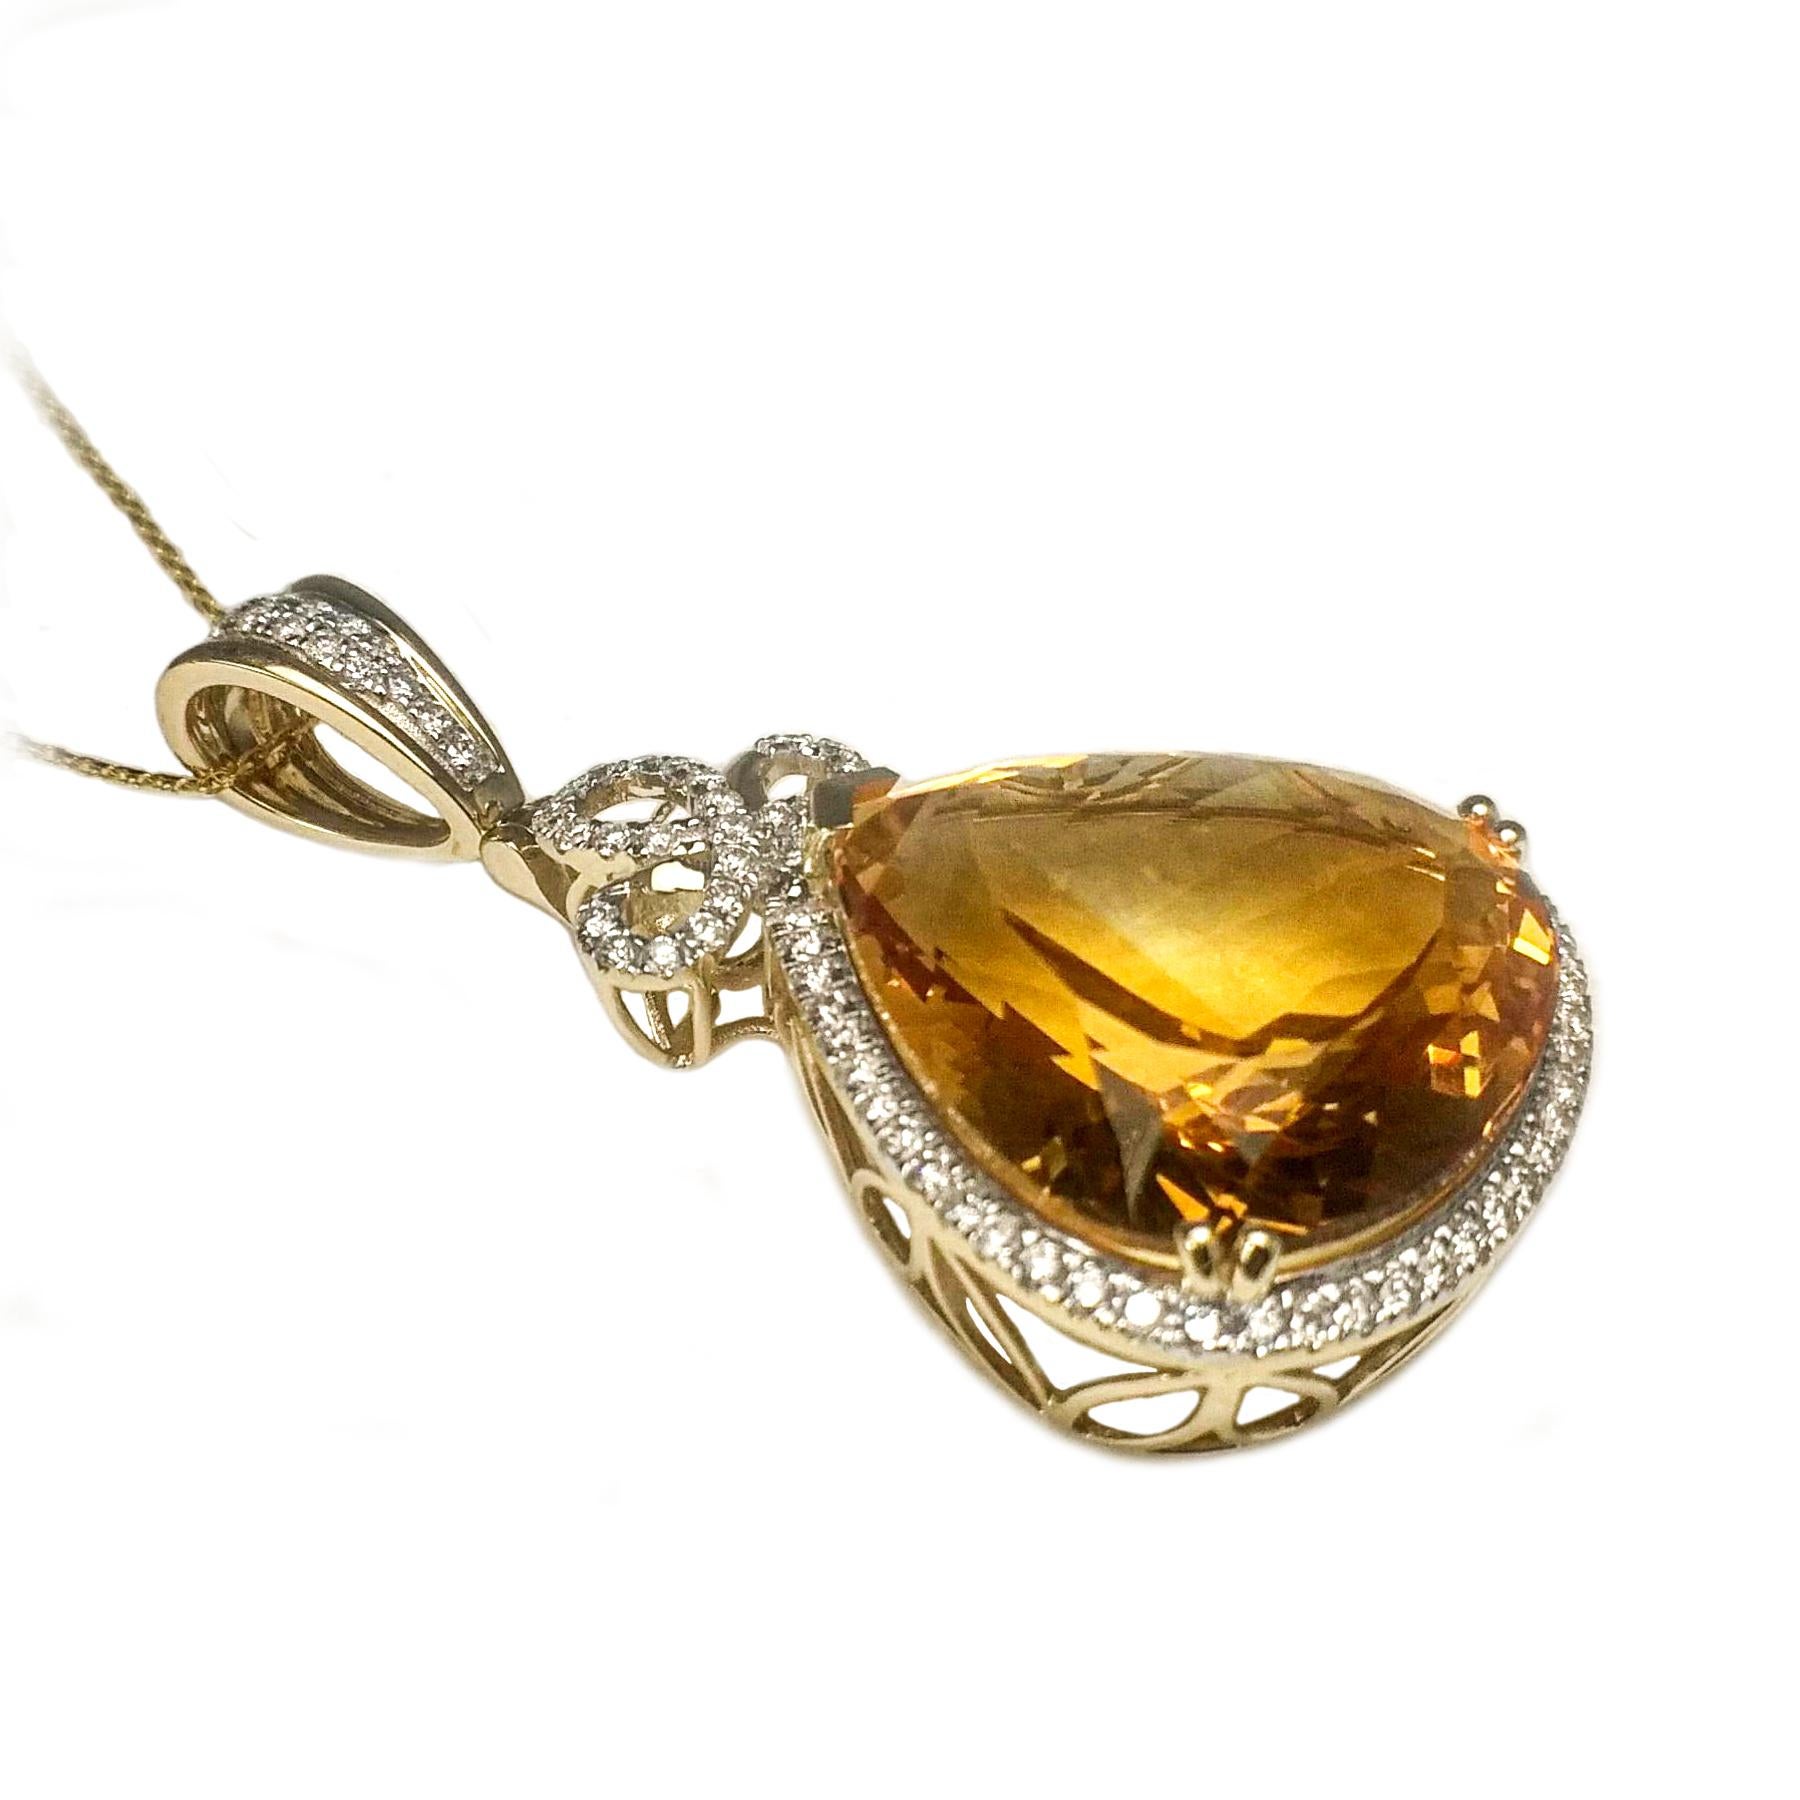 Stunning citrine and diamond pendant. Pear shape faceted, transparent, high luster, golden honey yellow 30.91 carats citrine encased in basket mounting, with one split prong and four bead prongs, framed in round brilliant cut diamonds along with